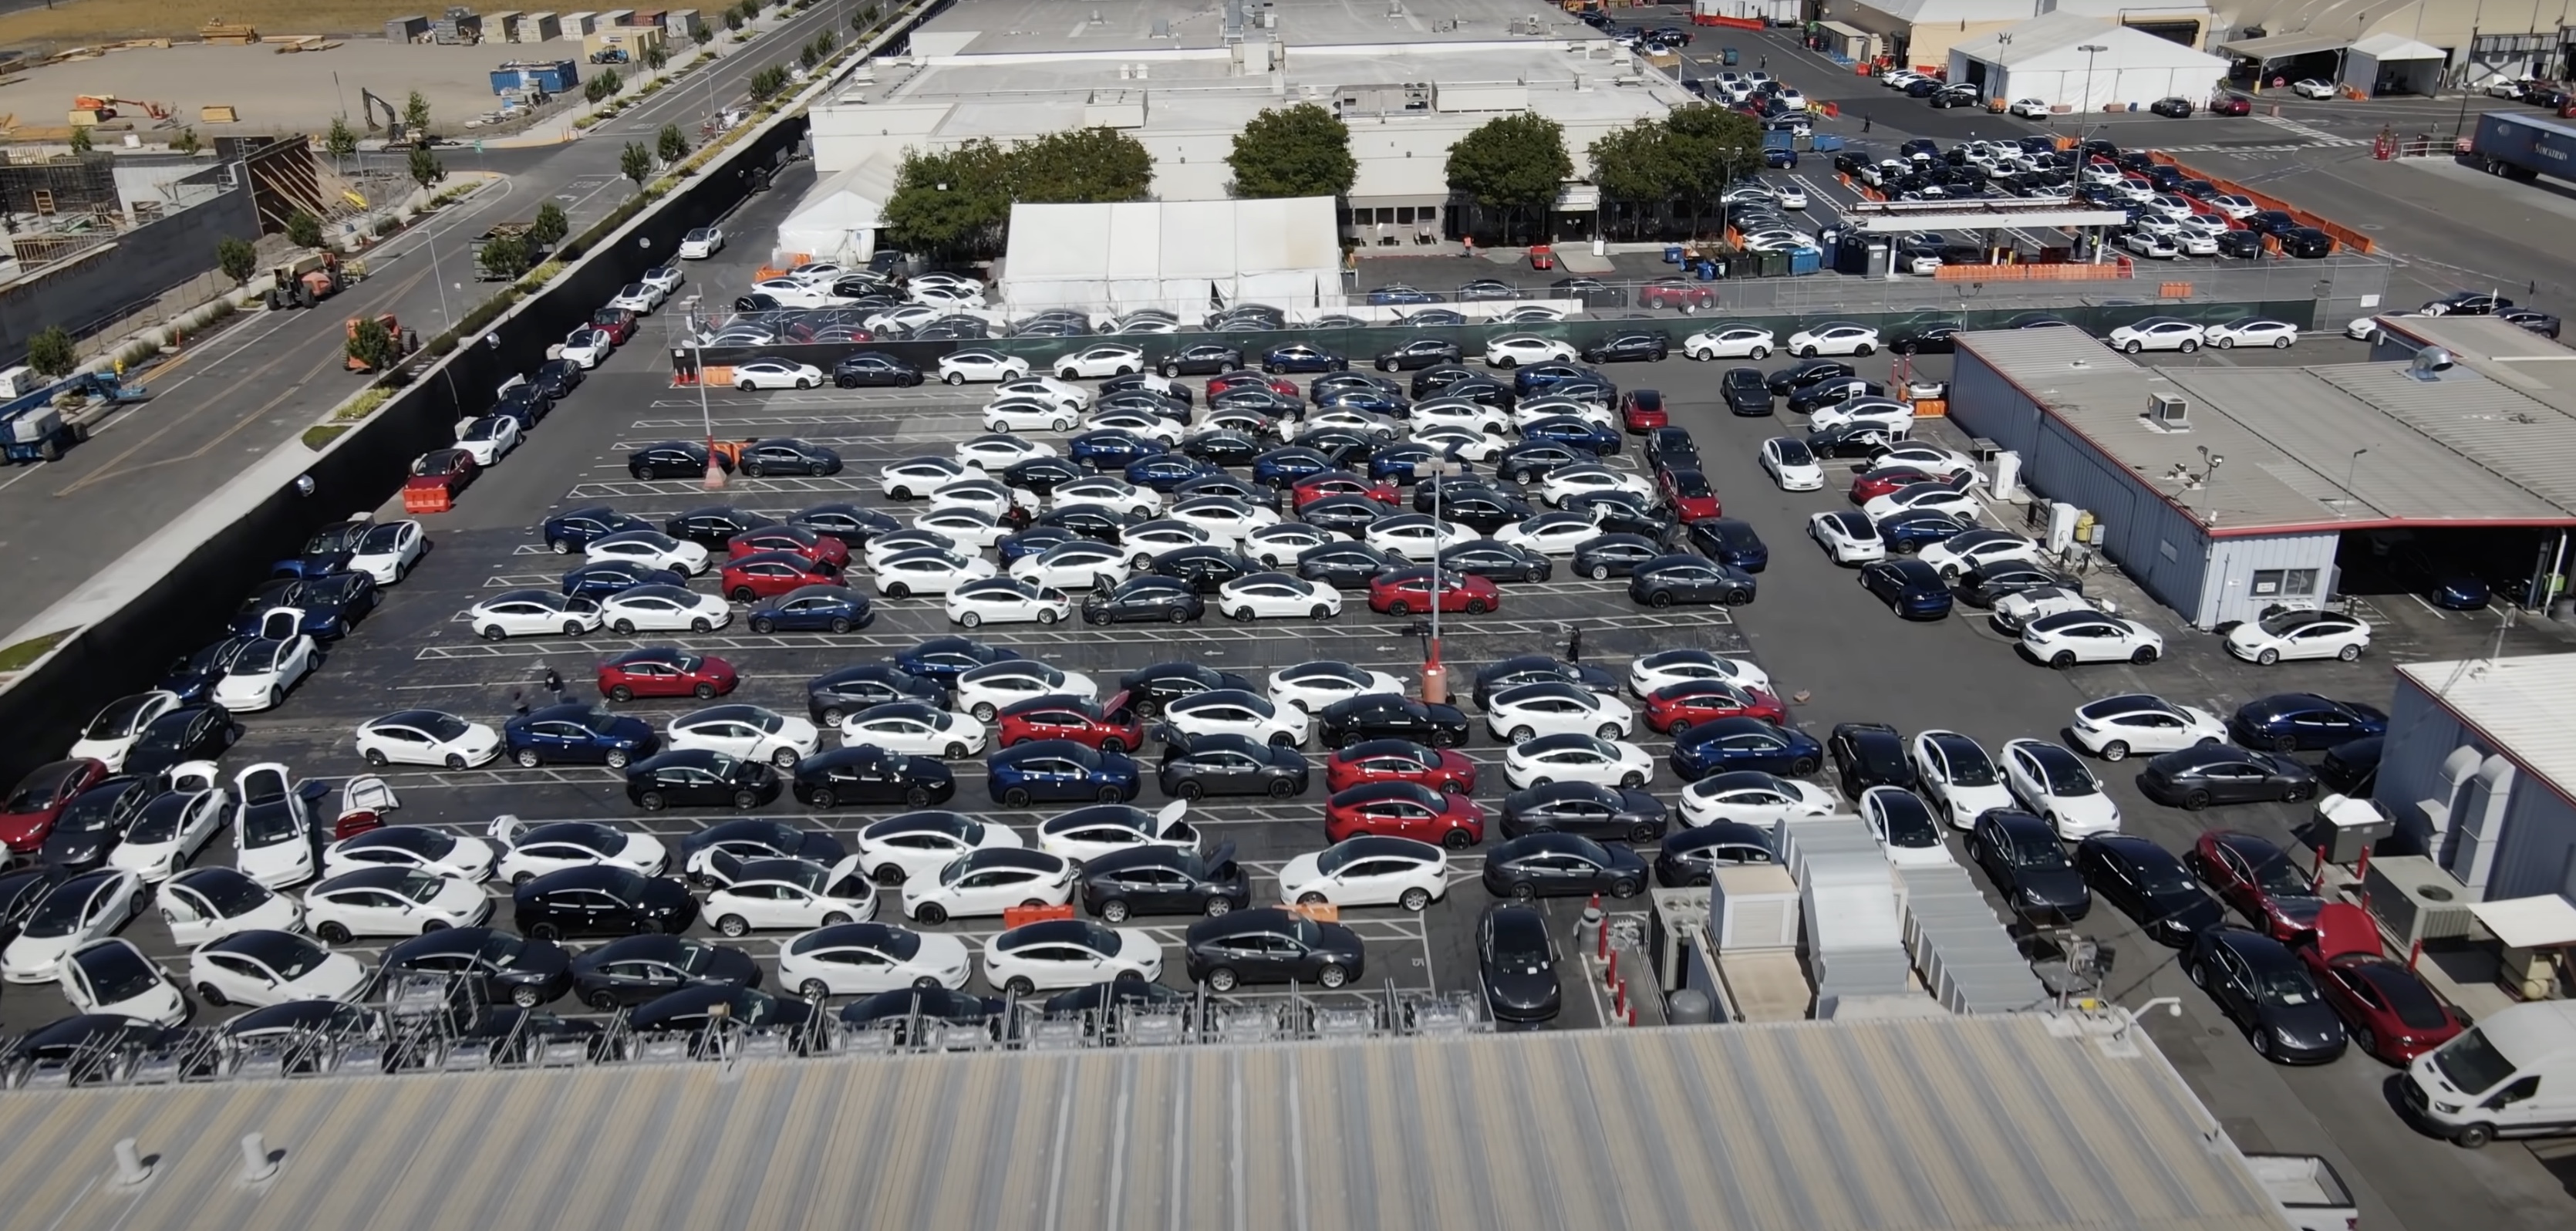 An image showing a Tesla car lot with over 1,000 cars